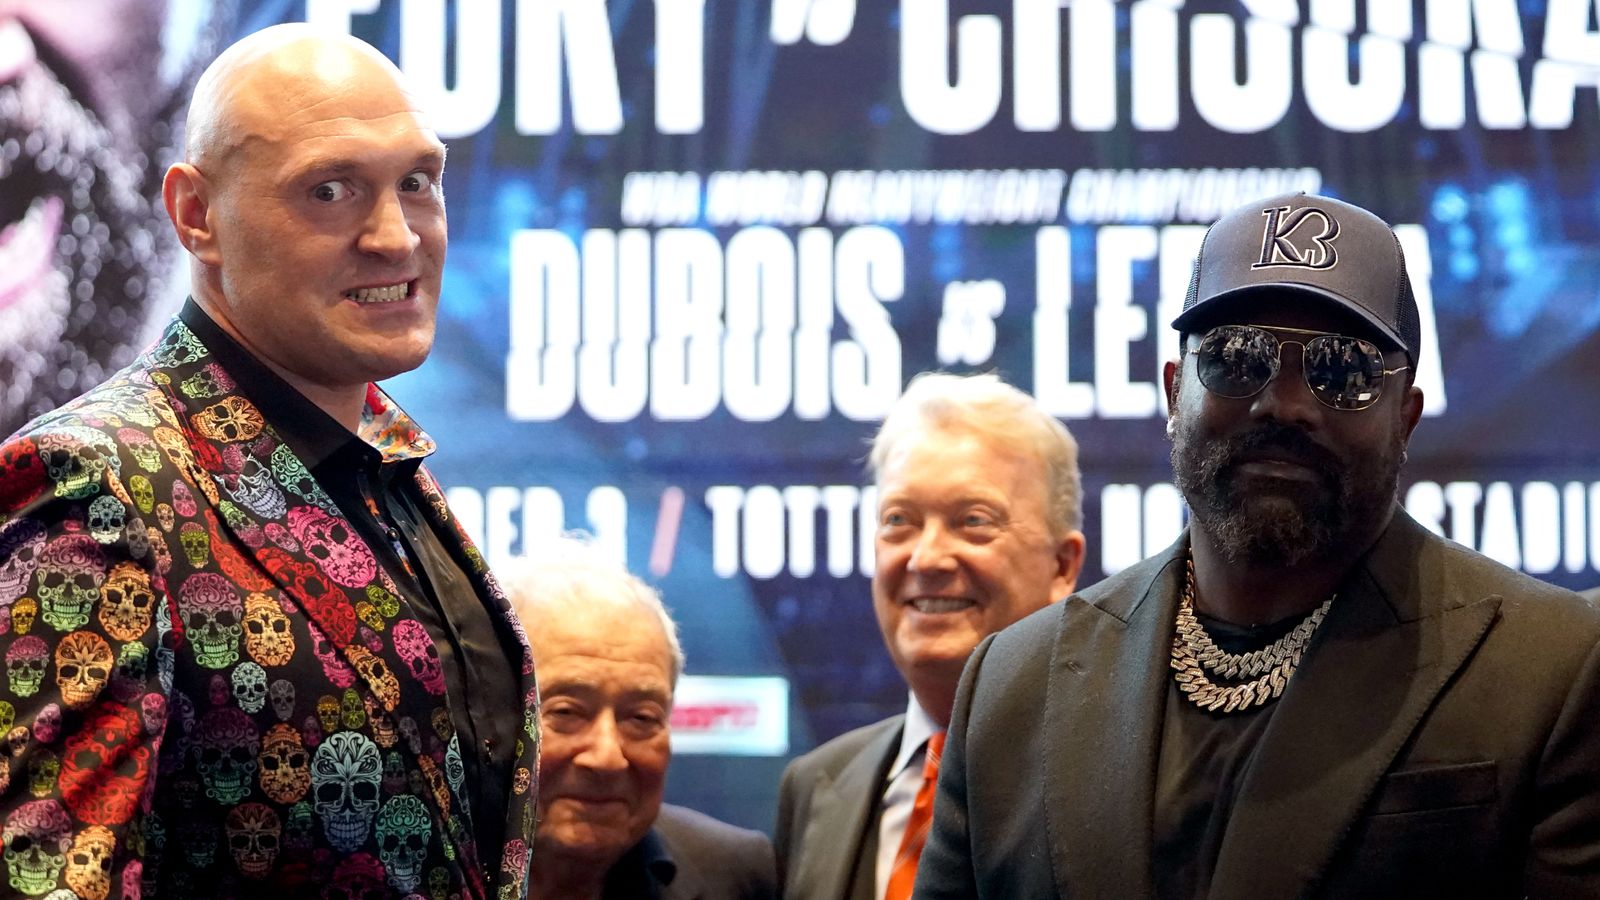 Tyson Fury goes head to head with Derek Chisora at first press conference for trilogy fight on December 3